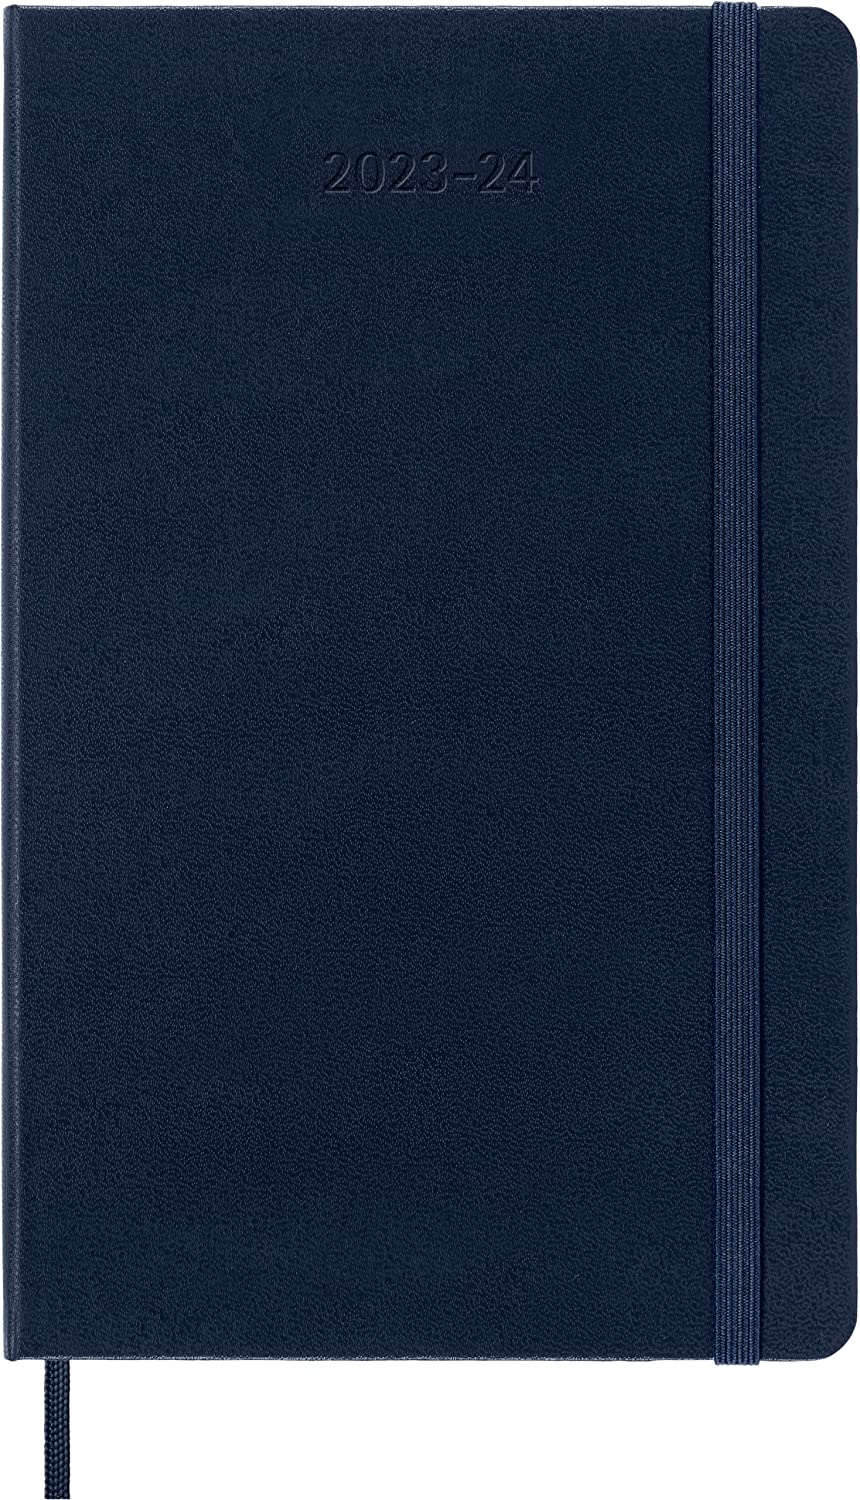 Agenda 2023-2024 - 18-Month Weekly Planner - Large, Hard Cover - Sapphire Blue | Moleskine